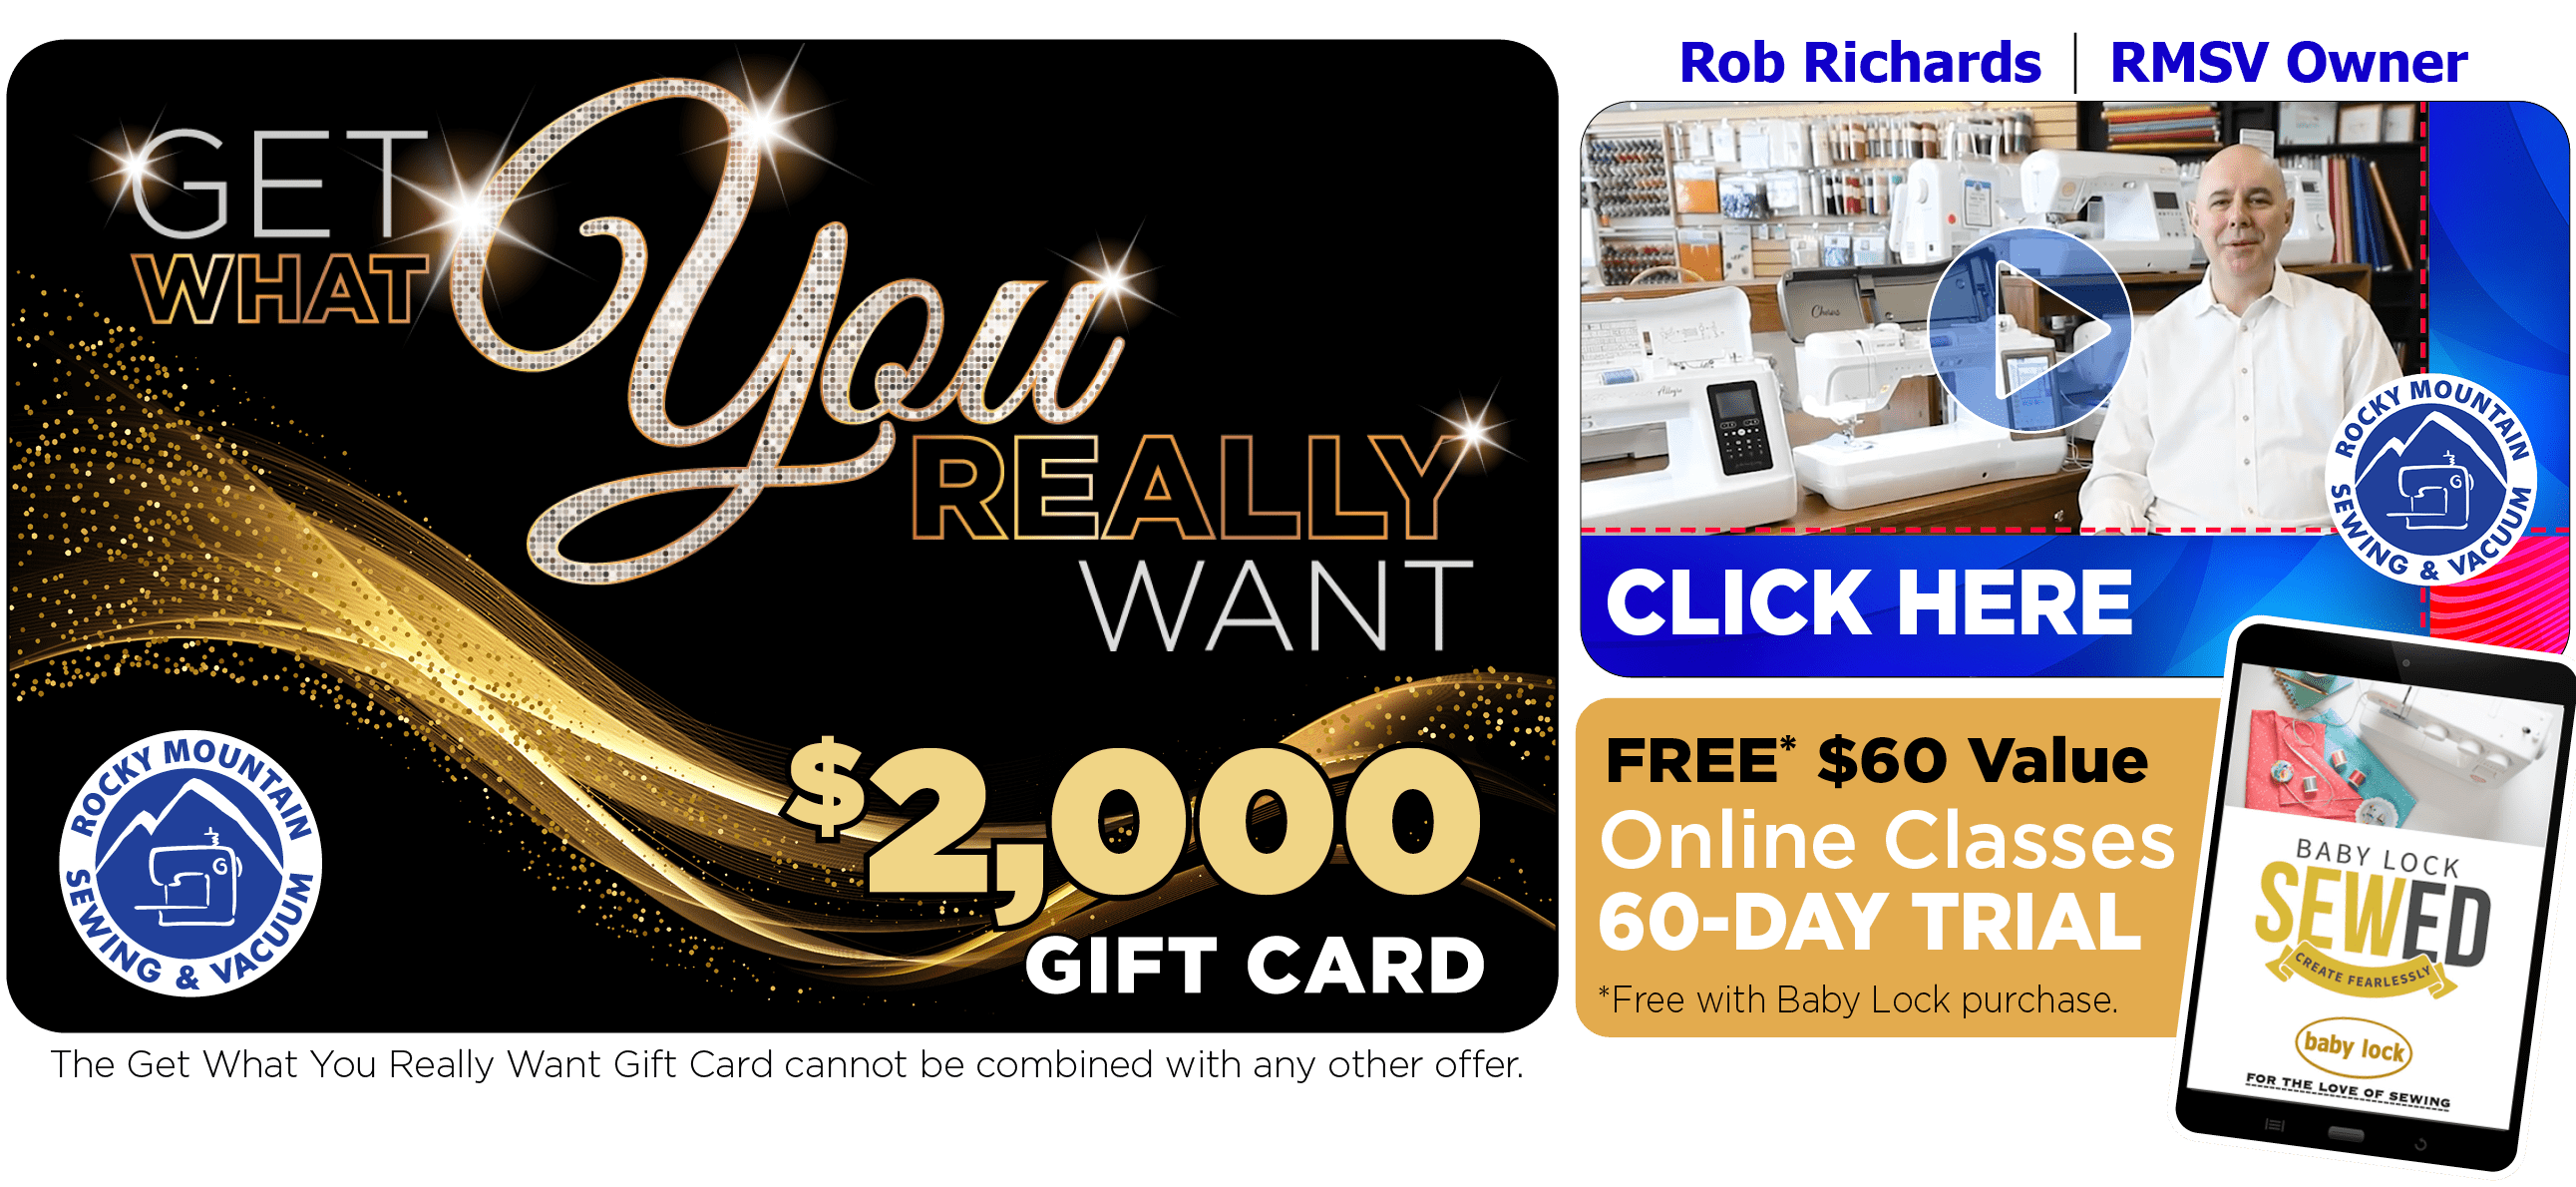 Get What You Really Want $2,000 Gift Card with Purchase